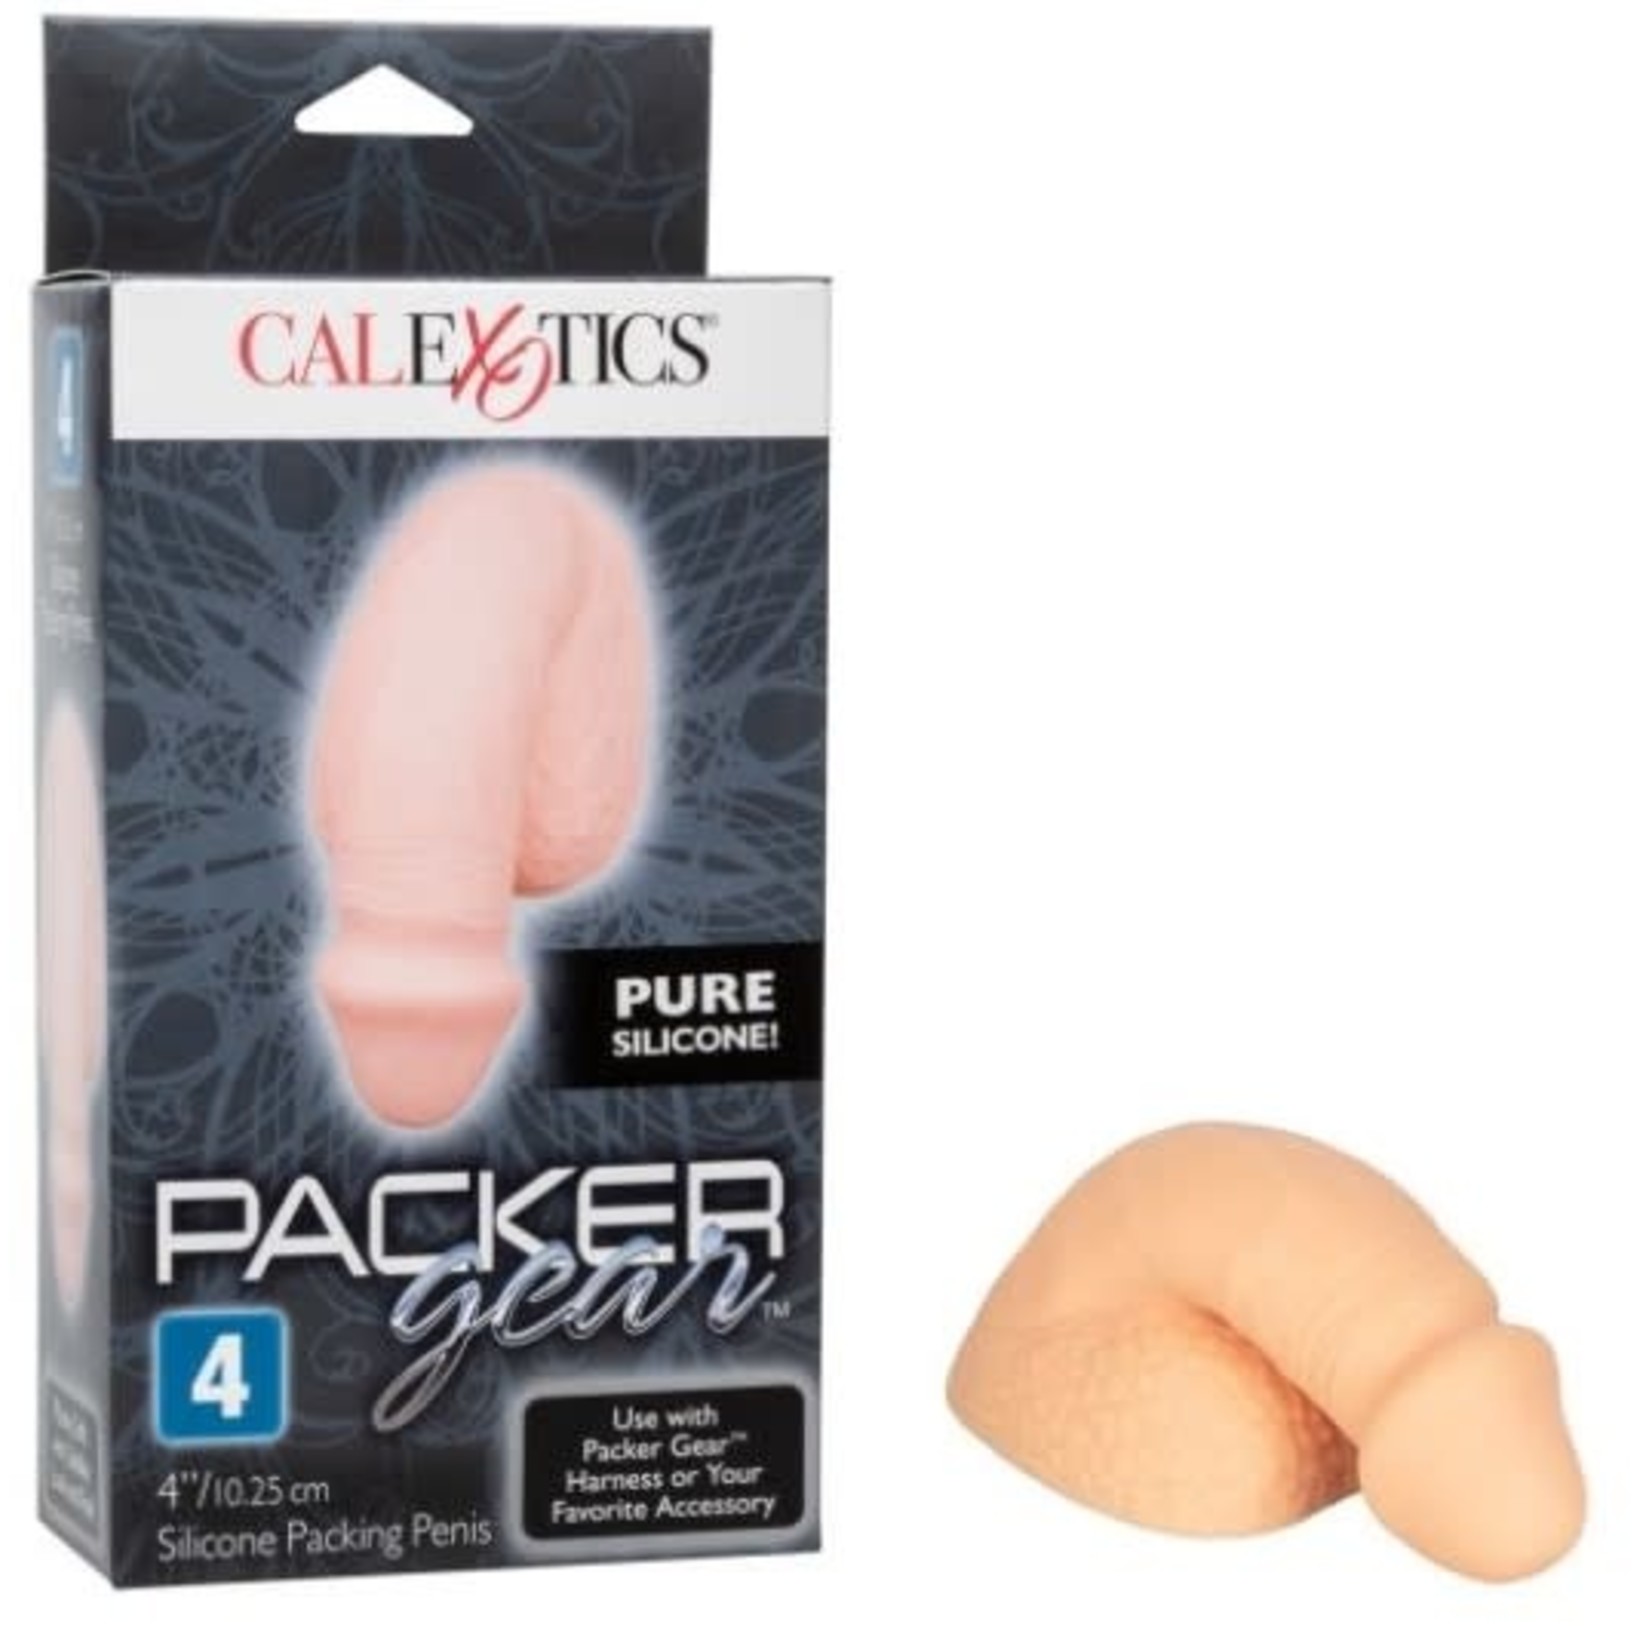 CALEXOTICS PACKER GEAR 4''/10.25CM SILICONE PACKING PENIS - IVORY